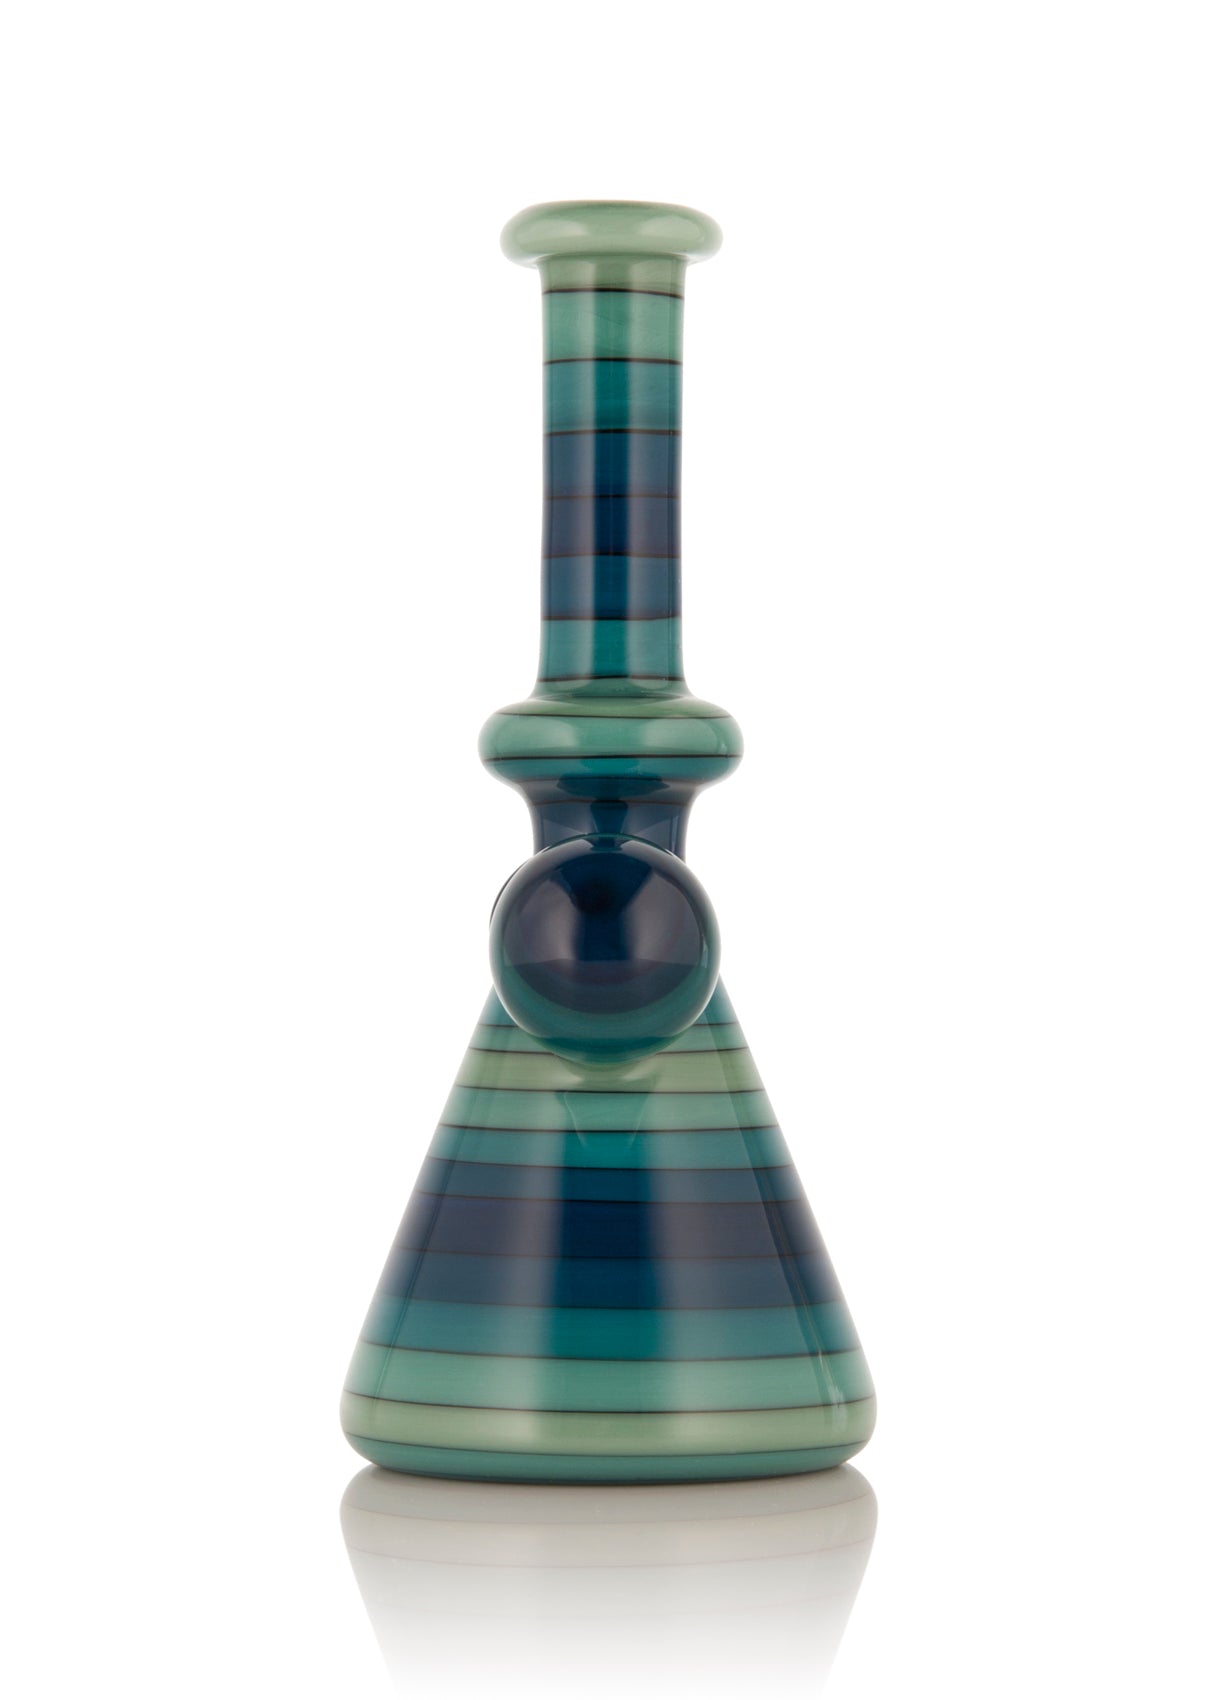 Encalmo Jammer in Aqua and Blue Mini Vapor Tube by Rone